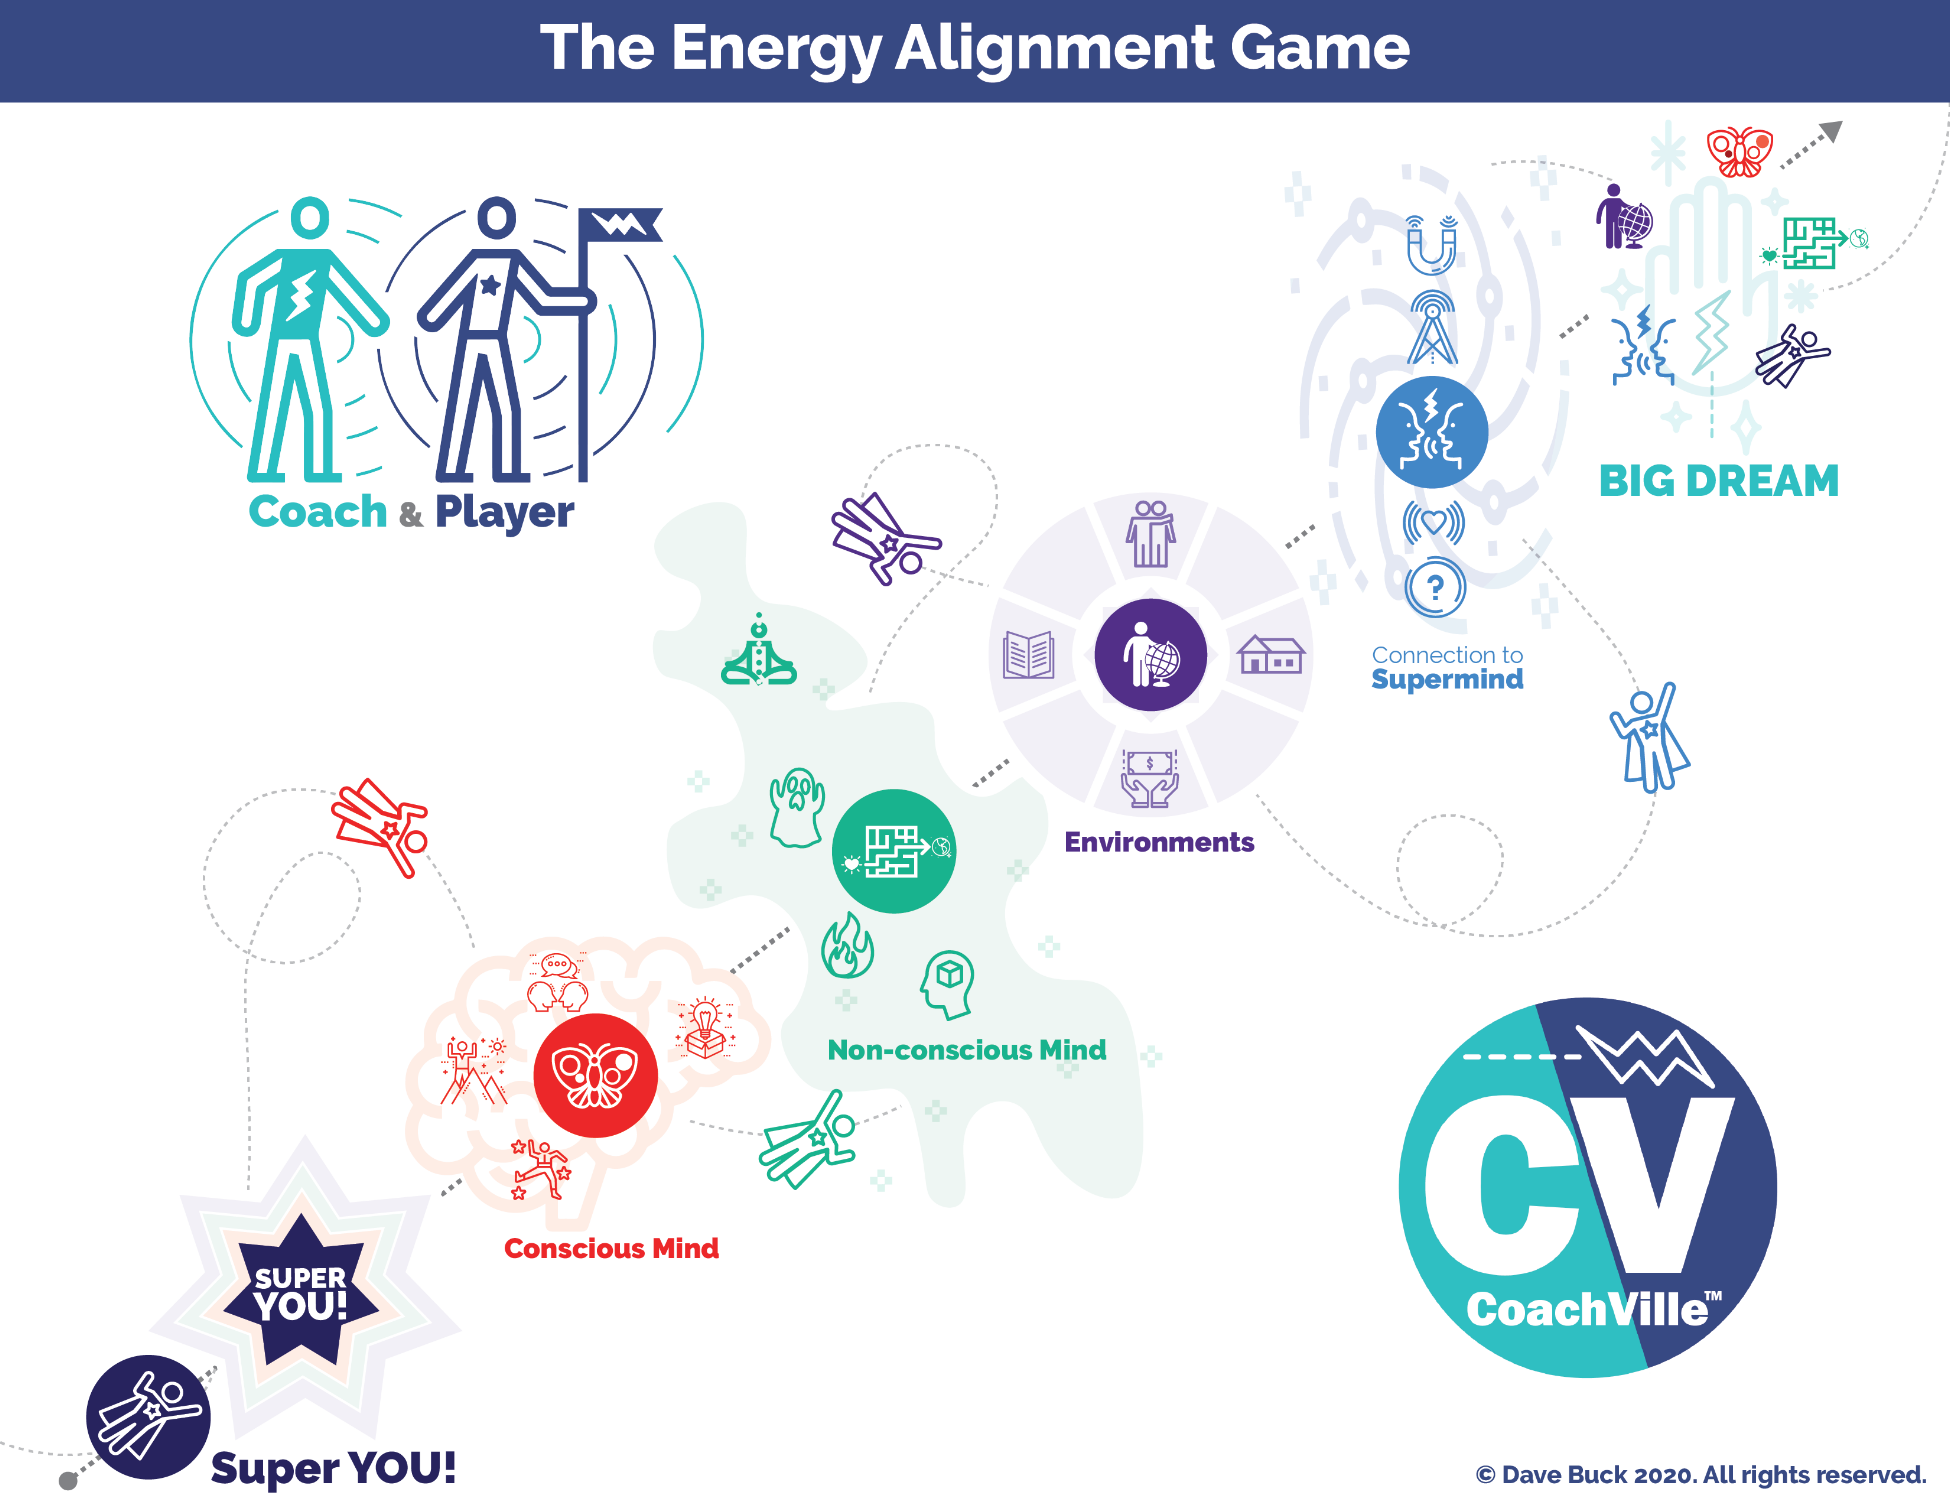 The Energy Alignment Game Model